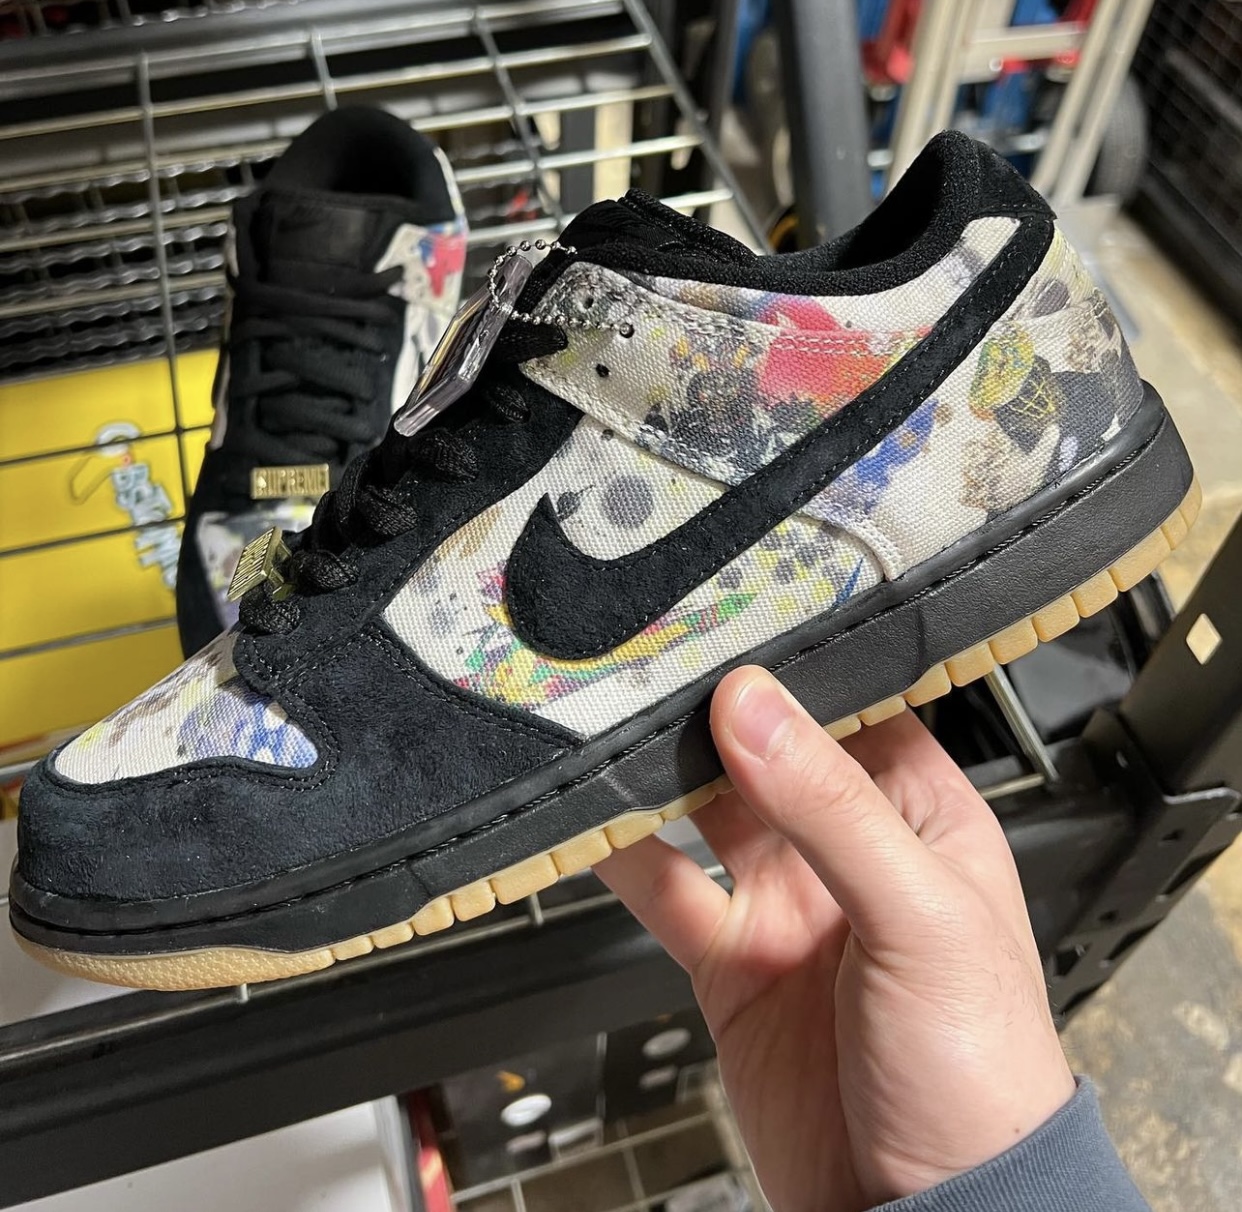 First Look At The Supreme x Nike SB Dunk Low “Rammellzee”